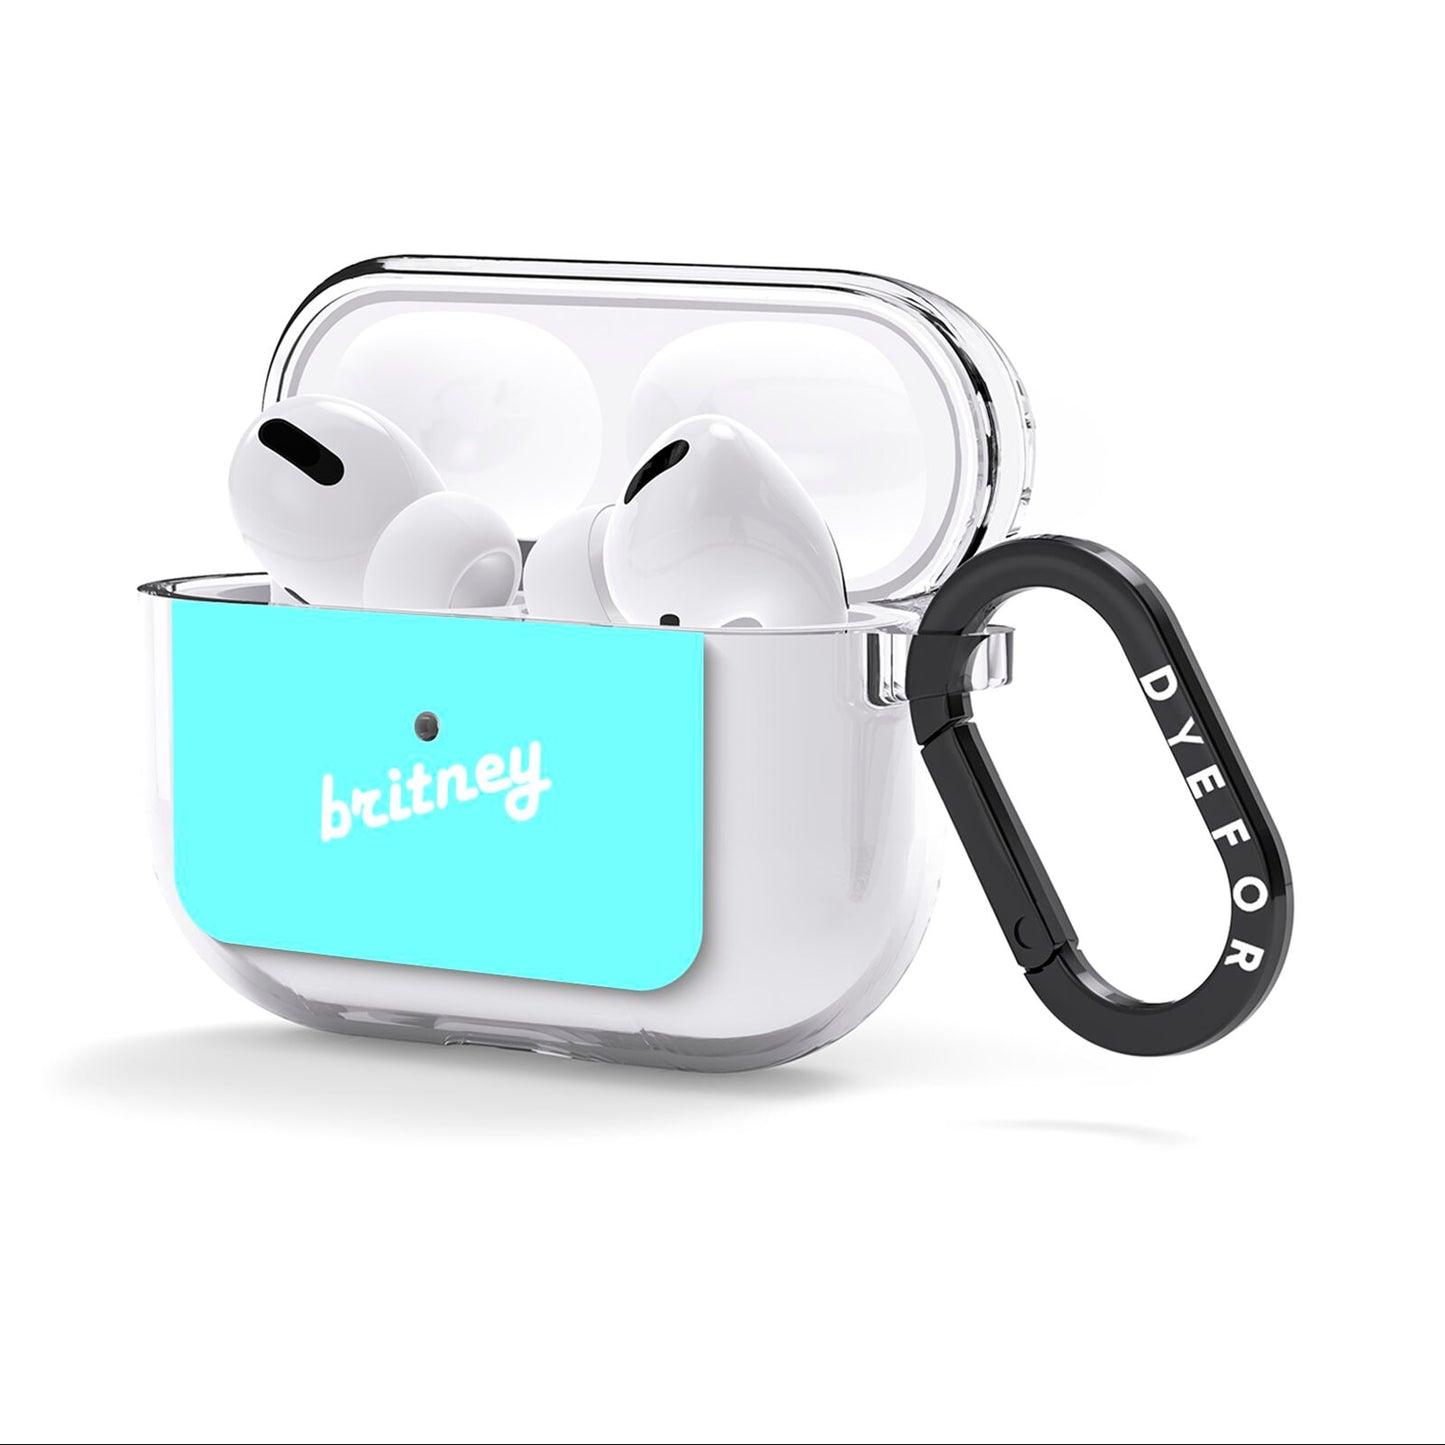 Personalised Blue Name AirPods Clear Case 3rd Gen Side Image